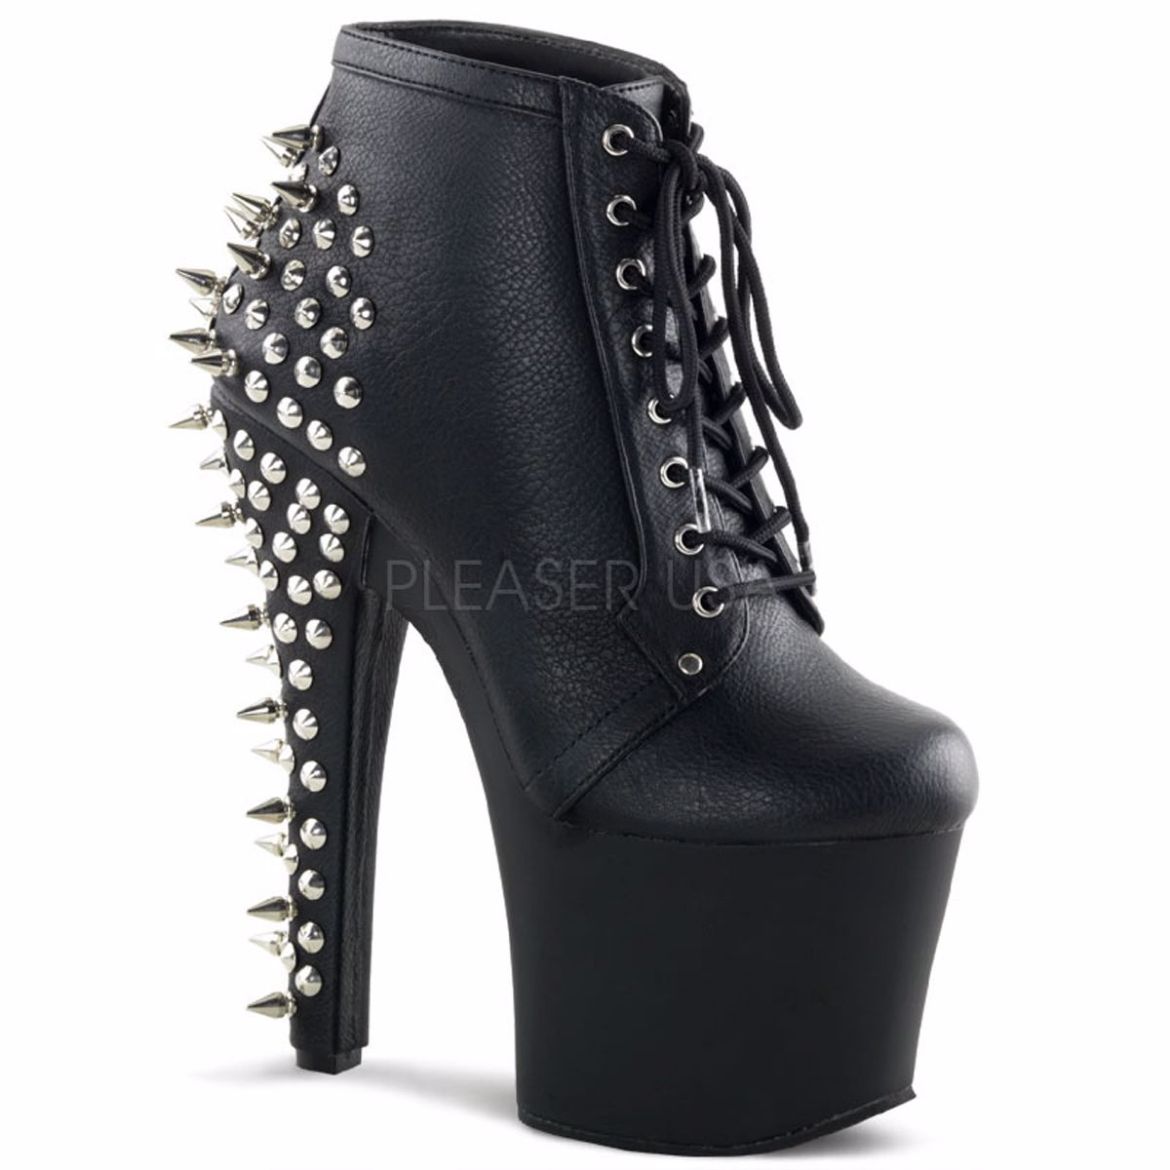 Product image of Pleaser Fearless-700-28 Black Faux Leather/Black Matte, 7 inch (17.8 cm) Heel, 3 1/4 inch (8.3 cm) Platform Ankle Boot